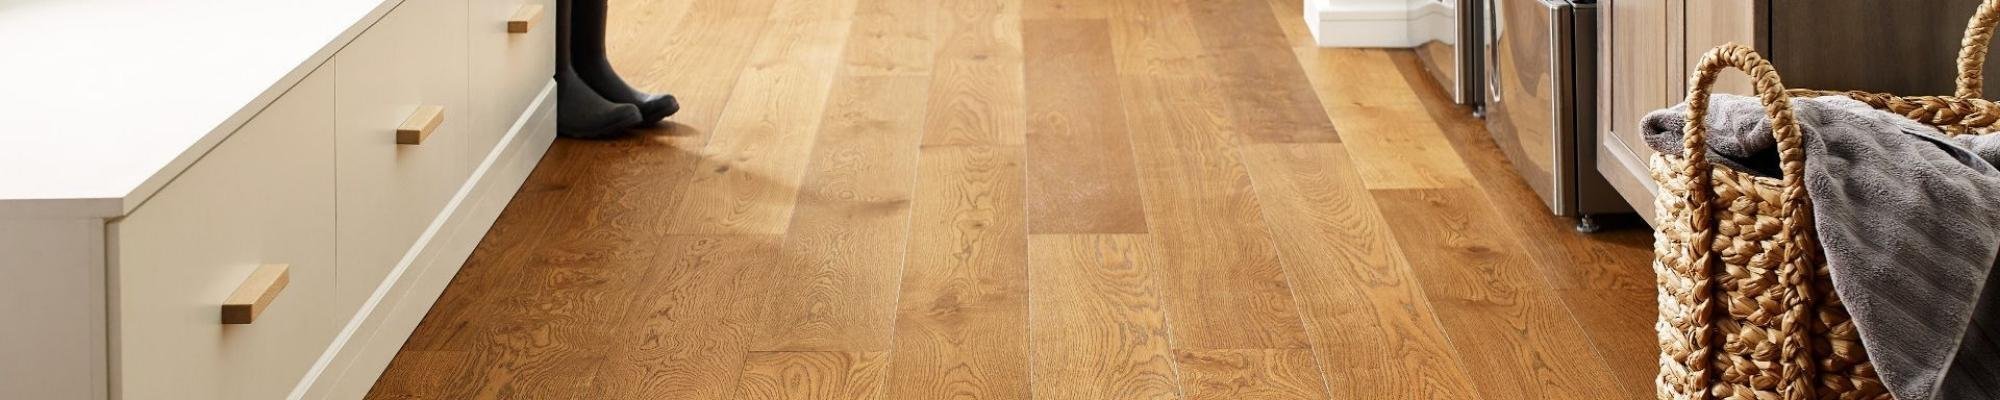 Hardwood Flooring from Young's Interiors & Flooring in Ford City